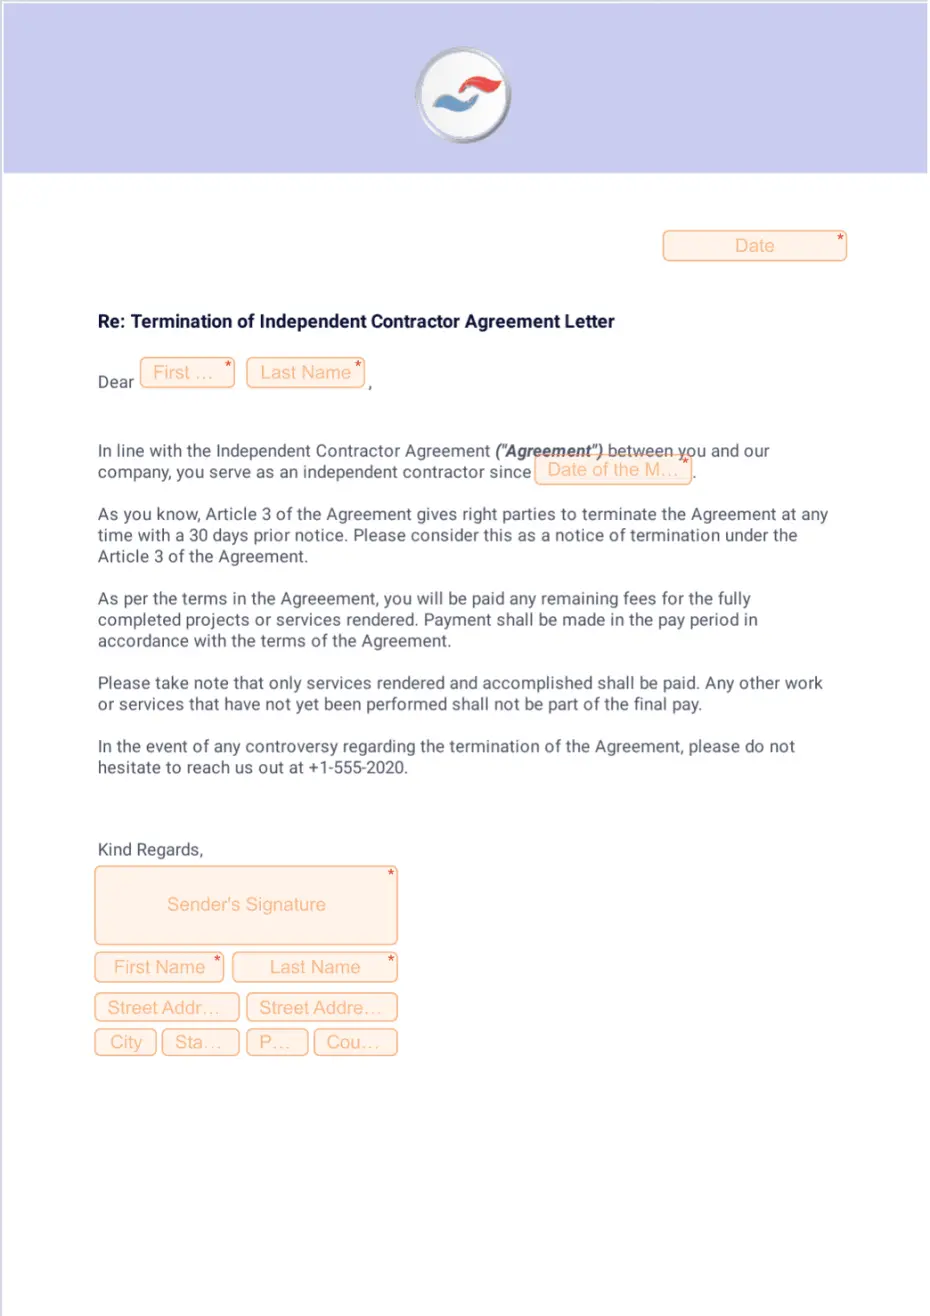 Independent Contractor Agreement Termination Letter